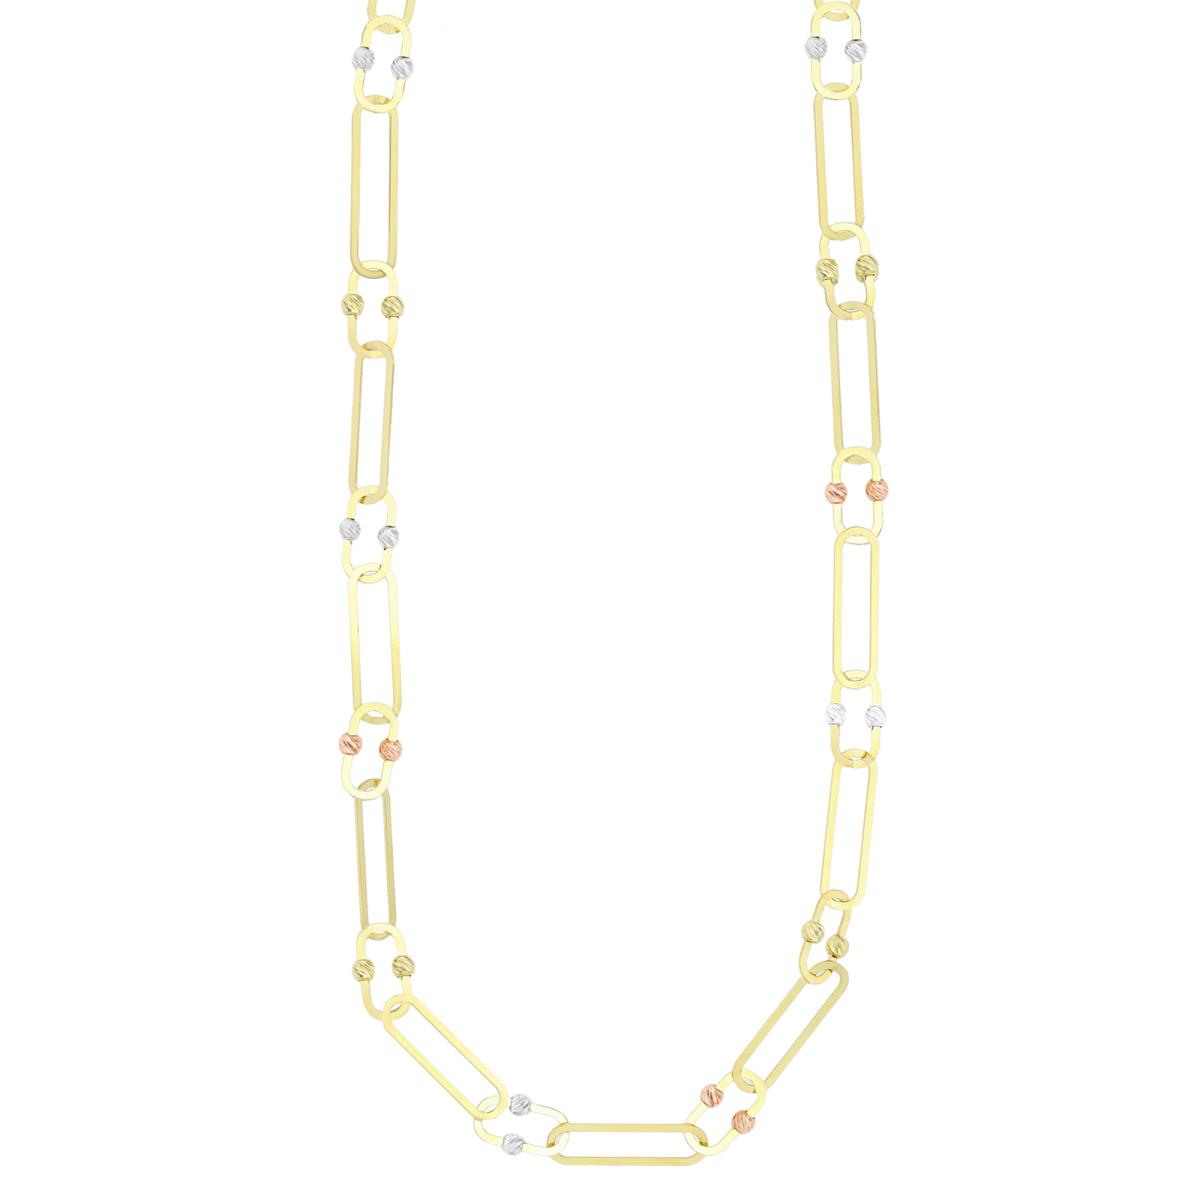 14K Tri-Color Gold Alternating DC Bead Paperclip 17" Chain Necklace